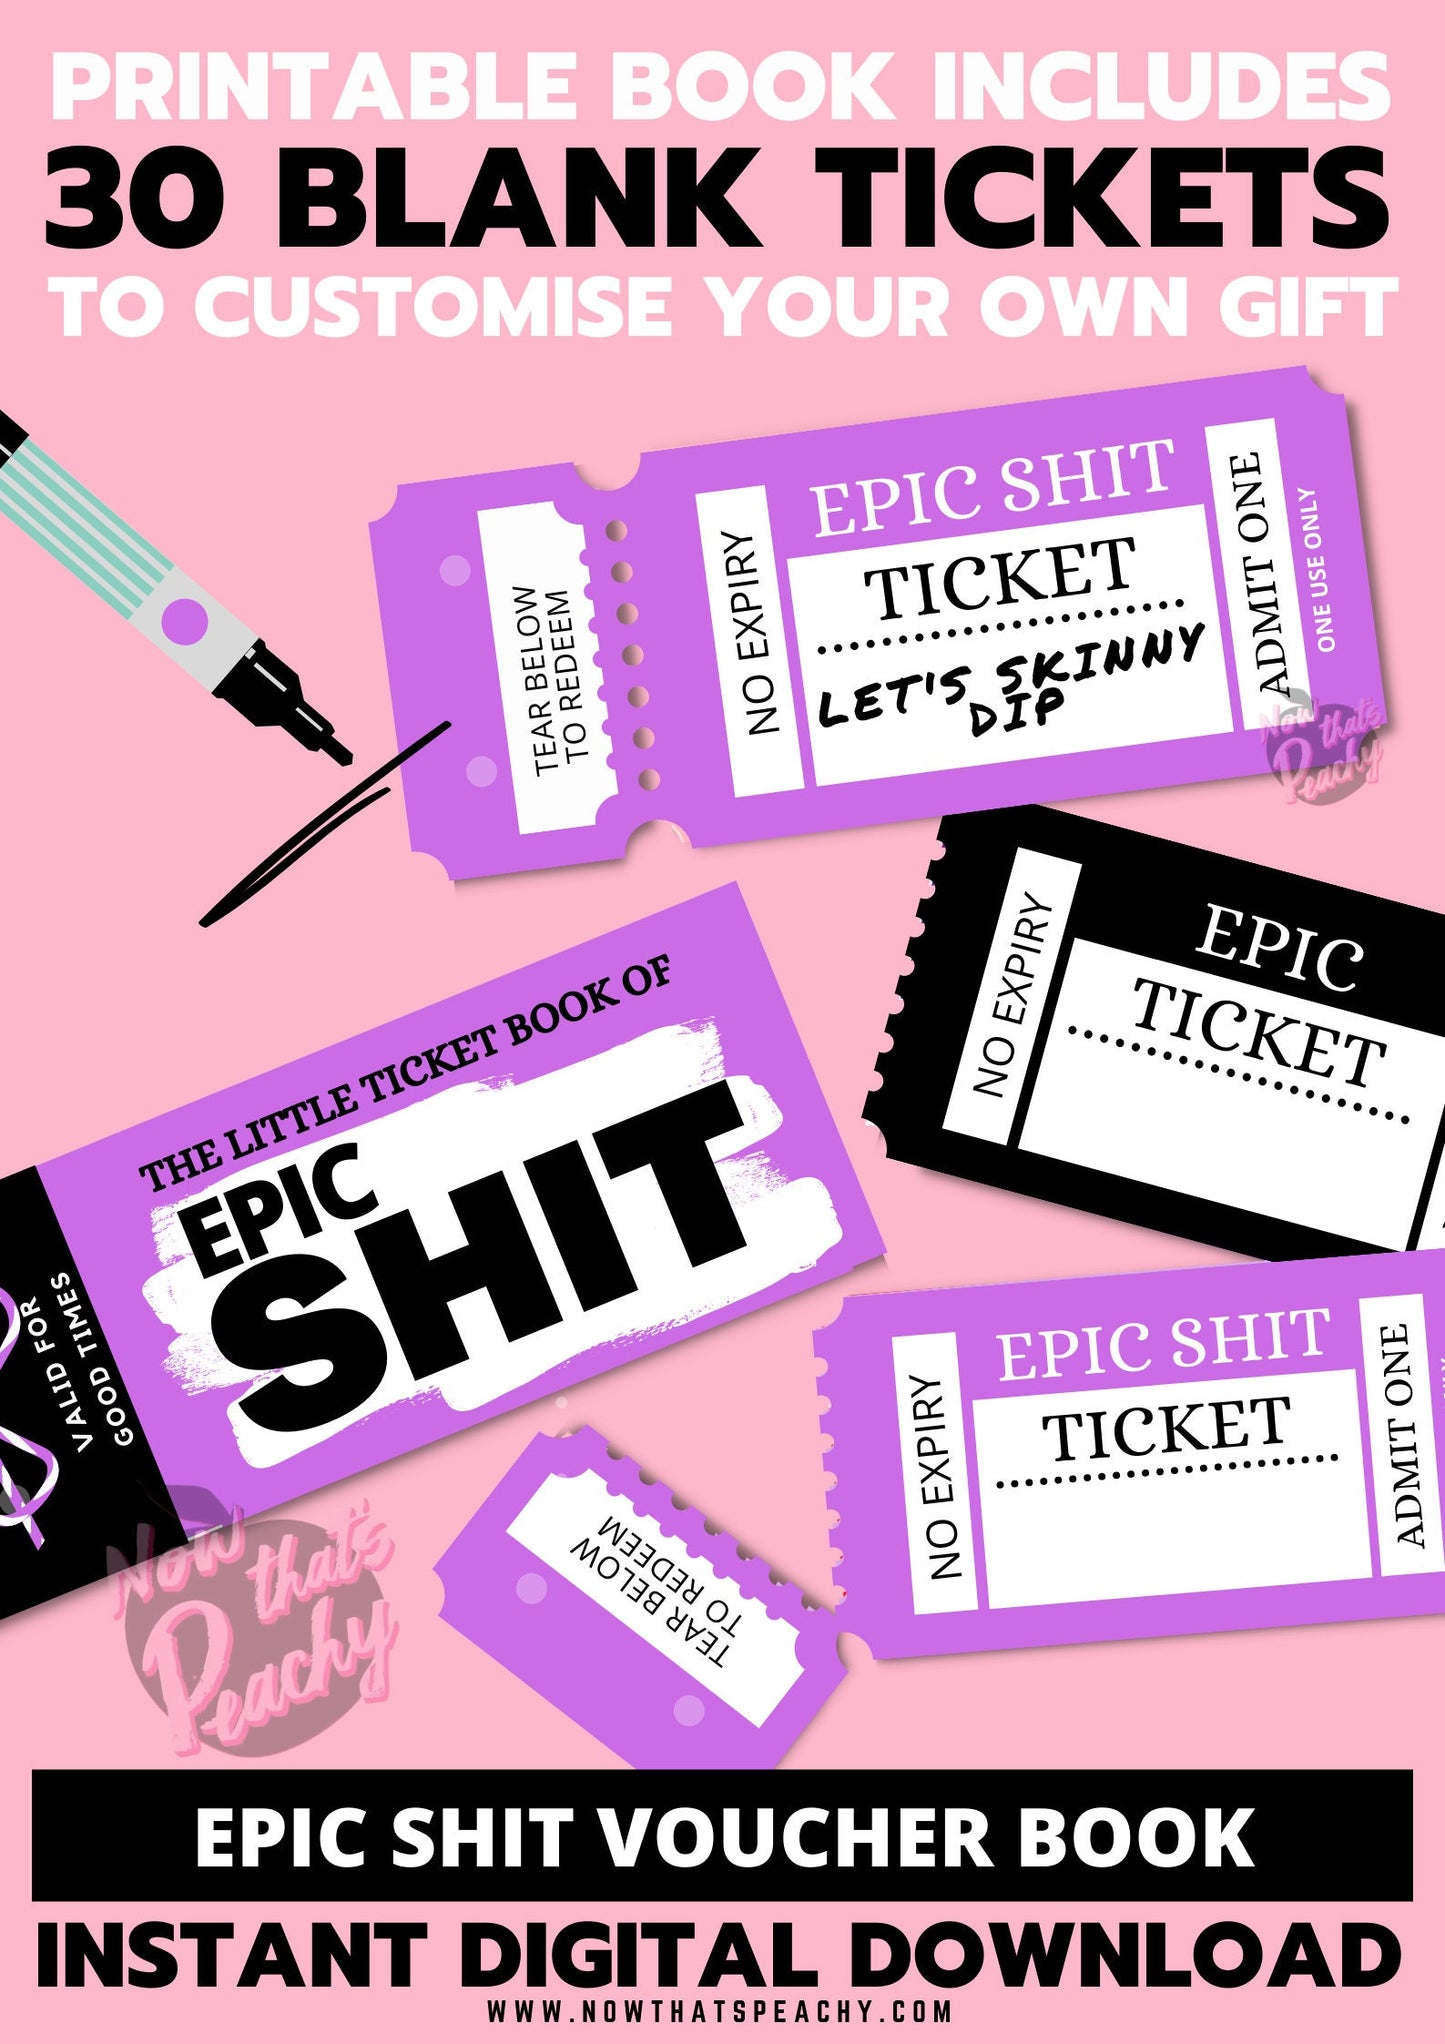 Shop for The Little Book of EPIC SHIT Ticket Voucher Coupon book printable DIY Template Blank fun activity bestie BFF friends couple date night treat appreciation print off valentines anniversary birthday wife husband digital download fun cheeky silly idea present print off funky purple retro vintage y2k theme x-rated boyfriend girlfriend partner Mrs. Mr Miss lady girl man male female adult anti vday  product shop easy cheap affordable budget personalized custom inspiration present